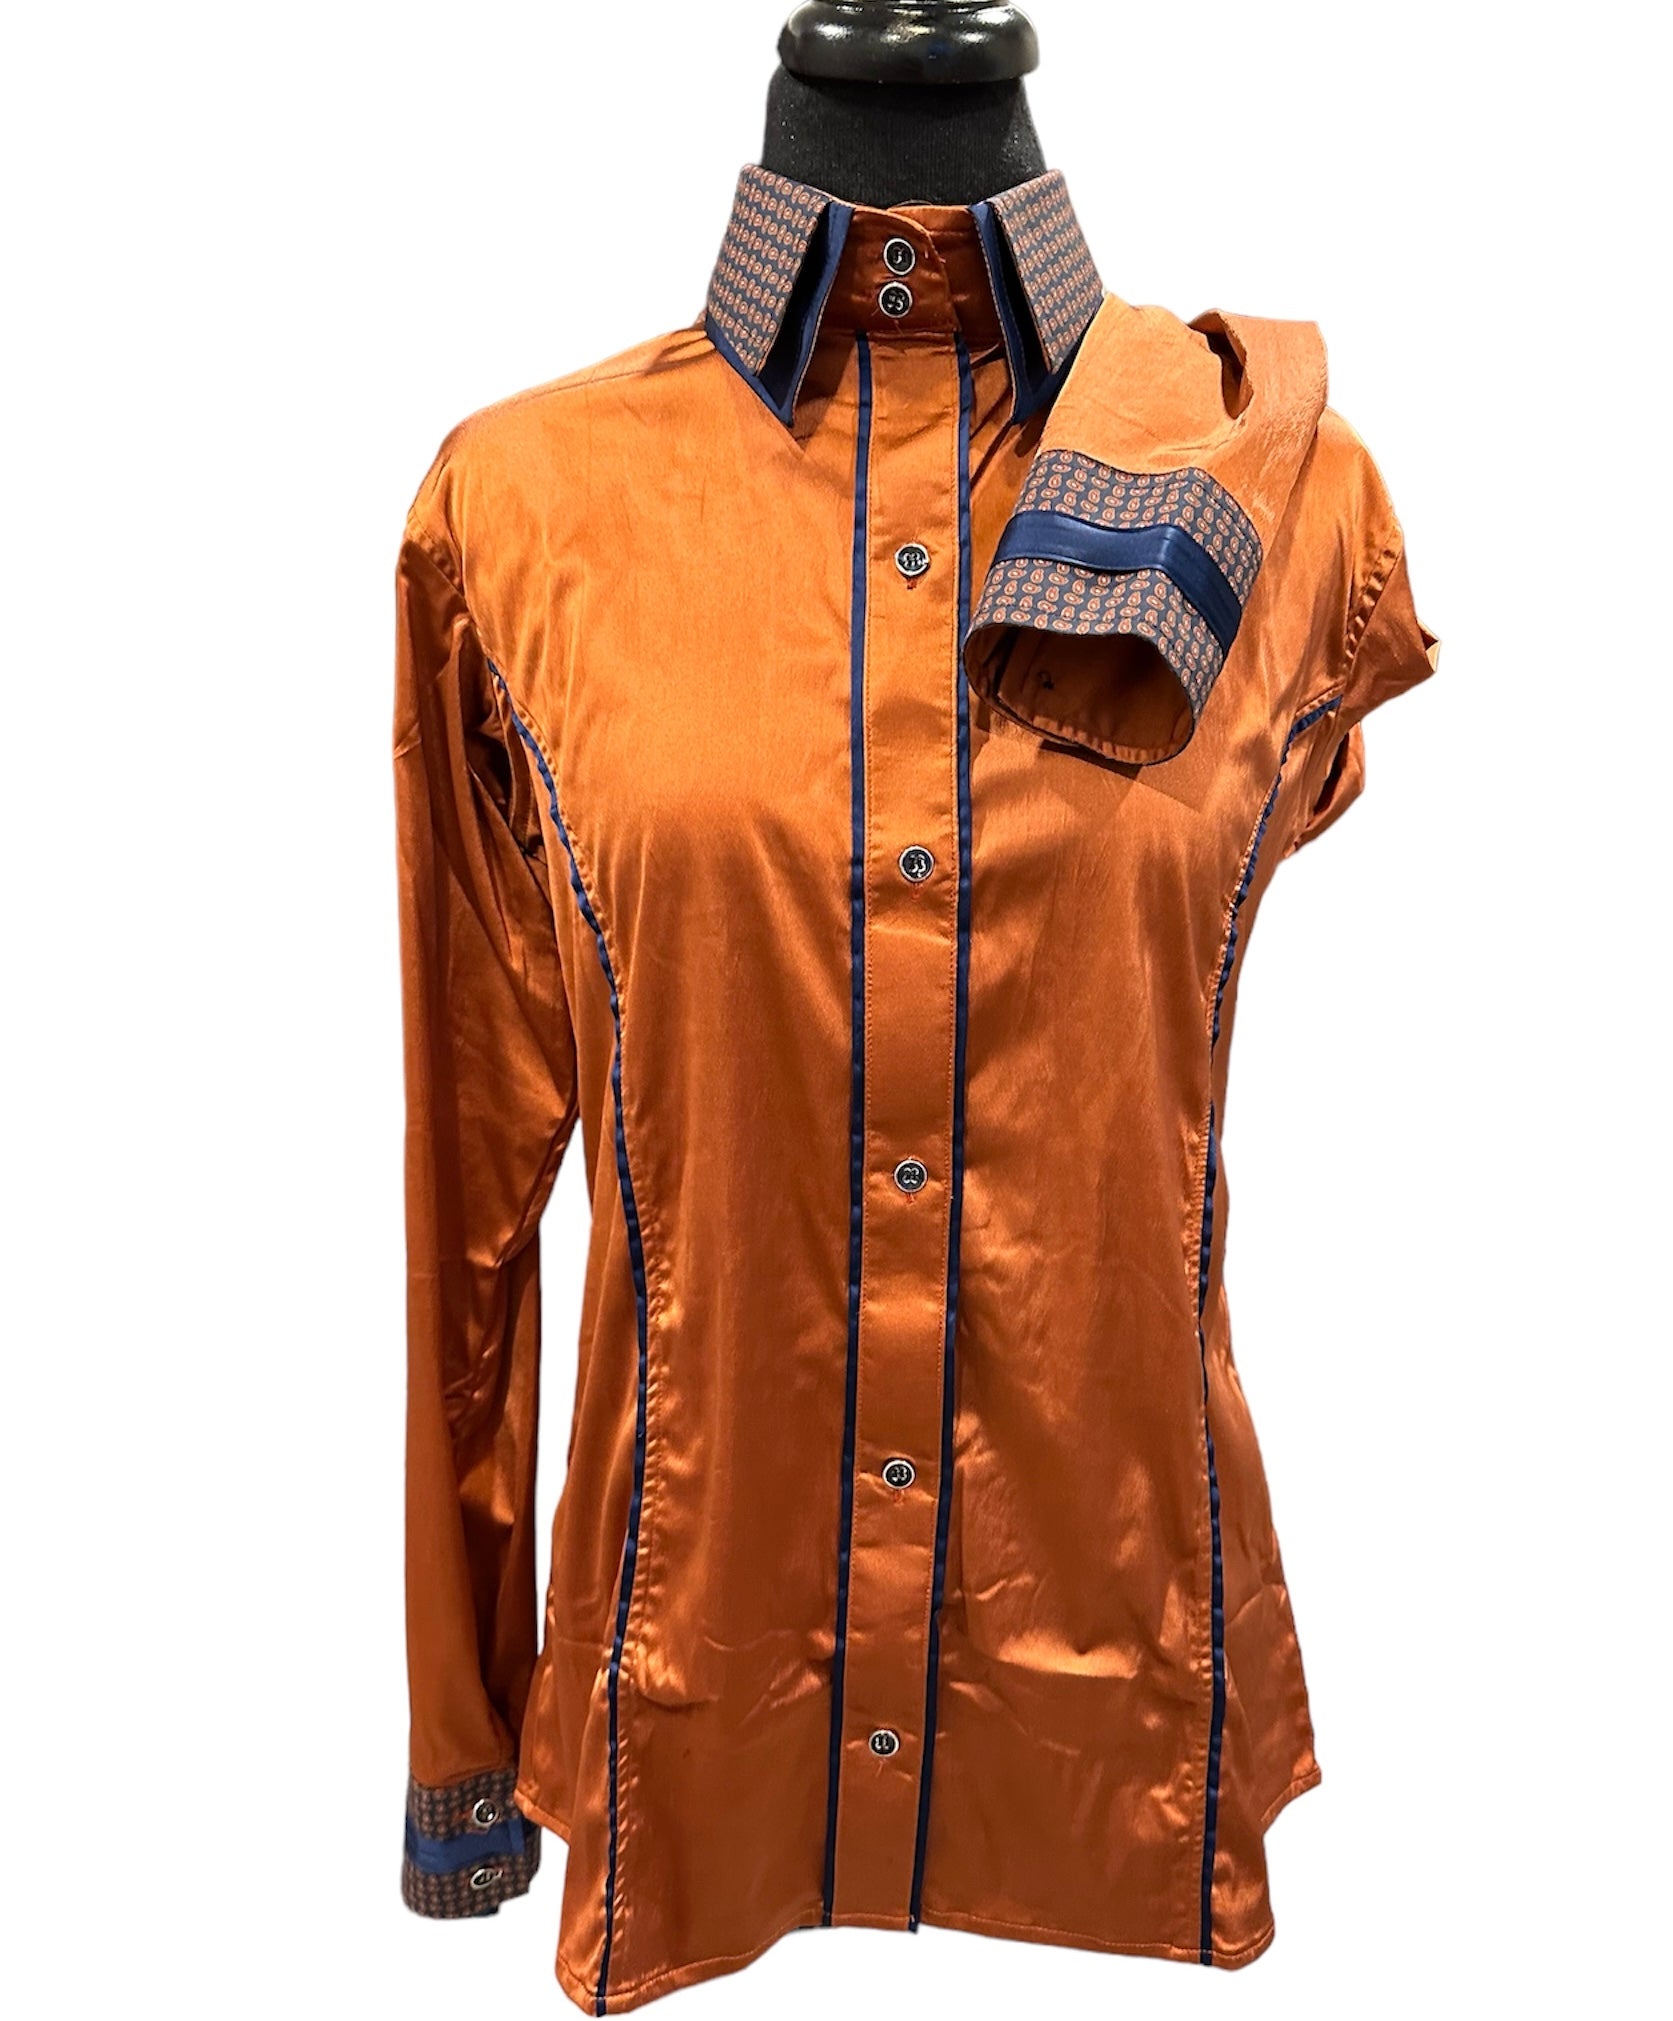 Stretch Satin Western Shirt Rust with Navy Paisley Accents